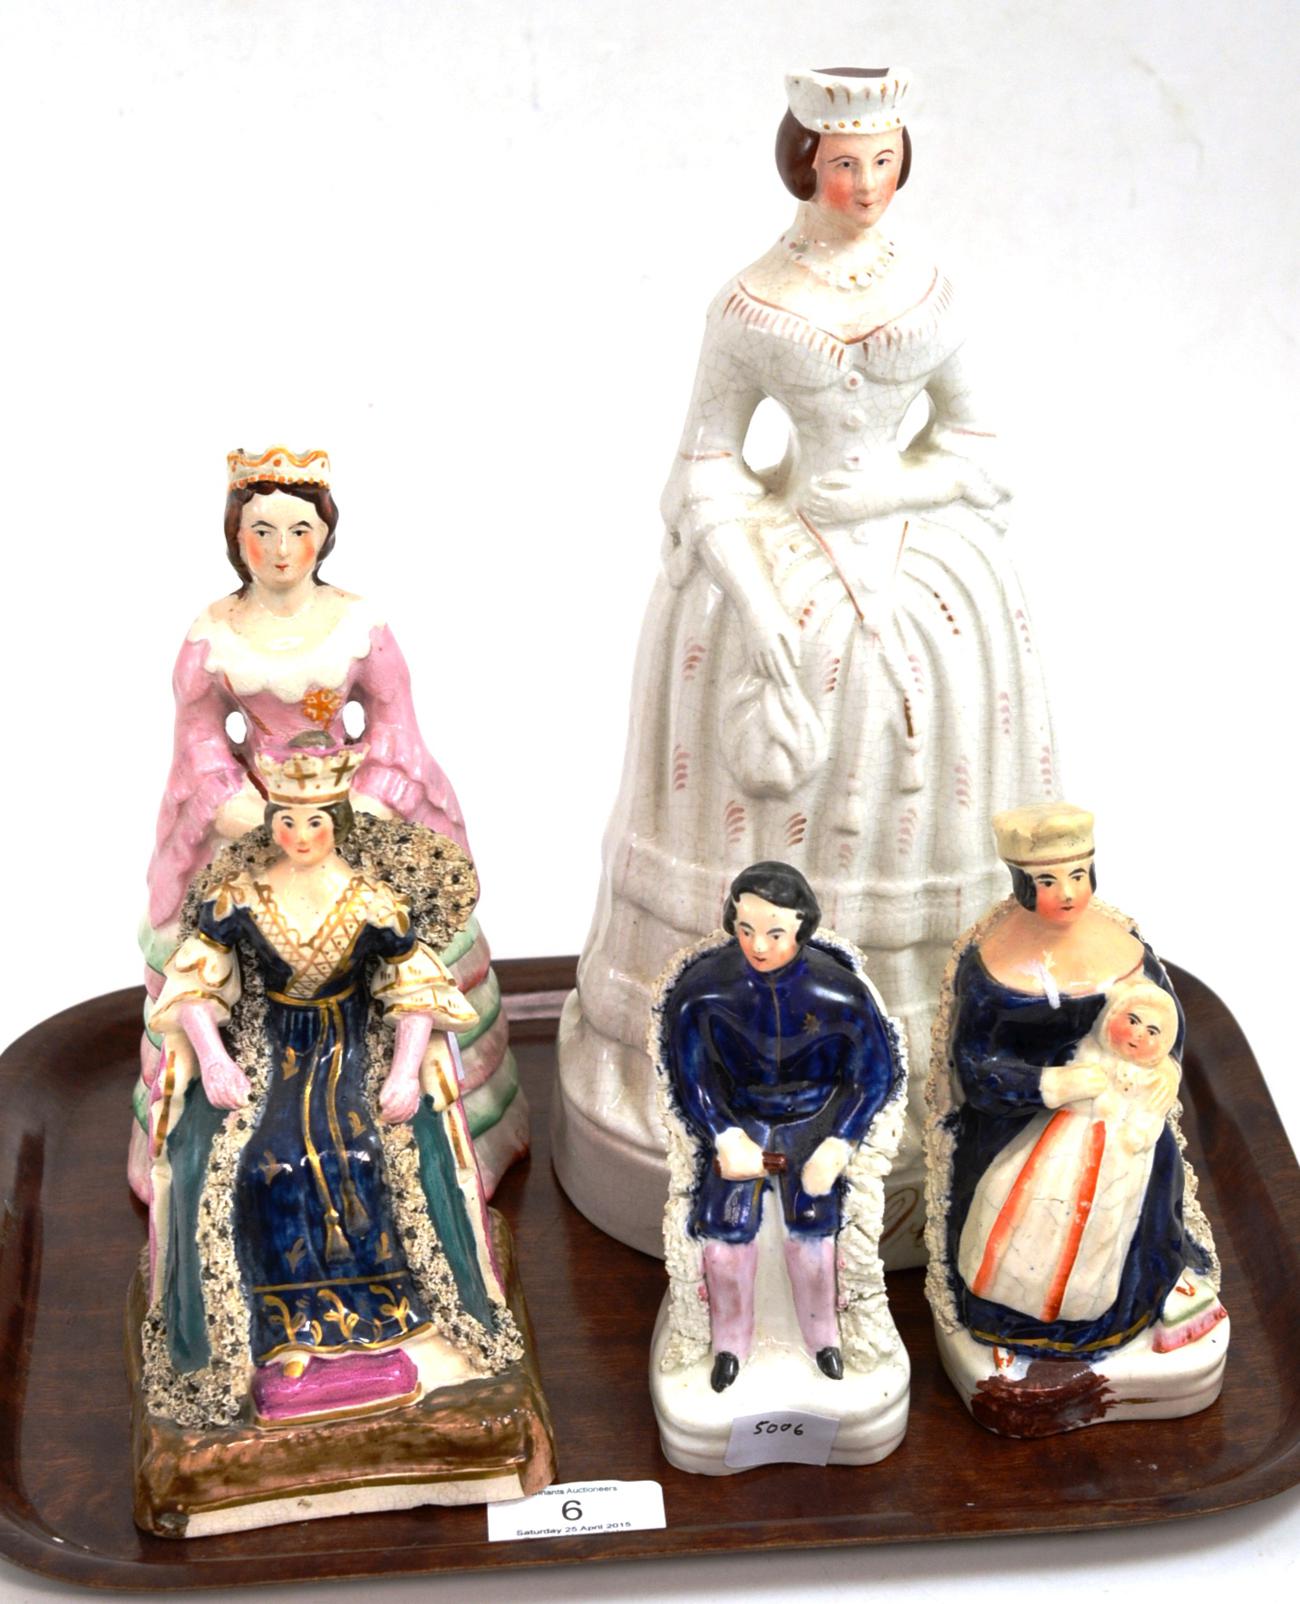 A Staffordshire pottery figure of Queen Victoria, circa 1840, in ceremonial robes sitting in a